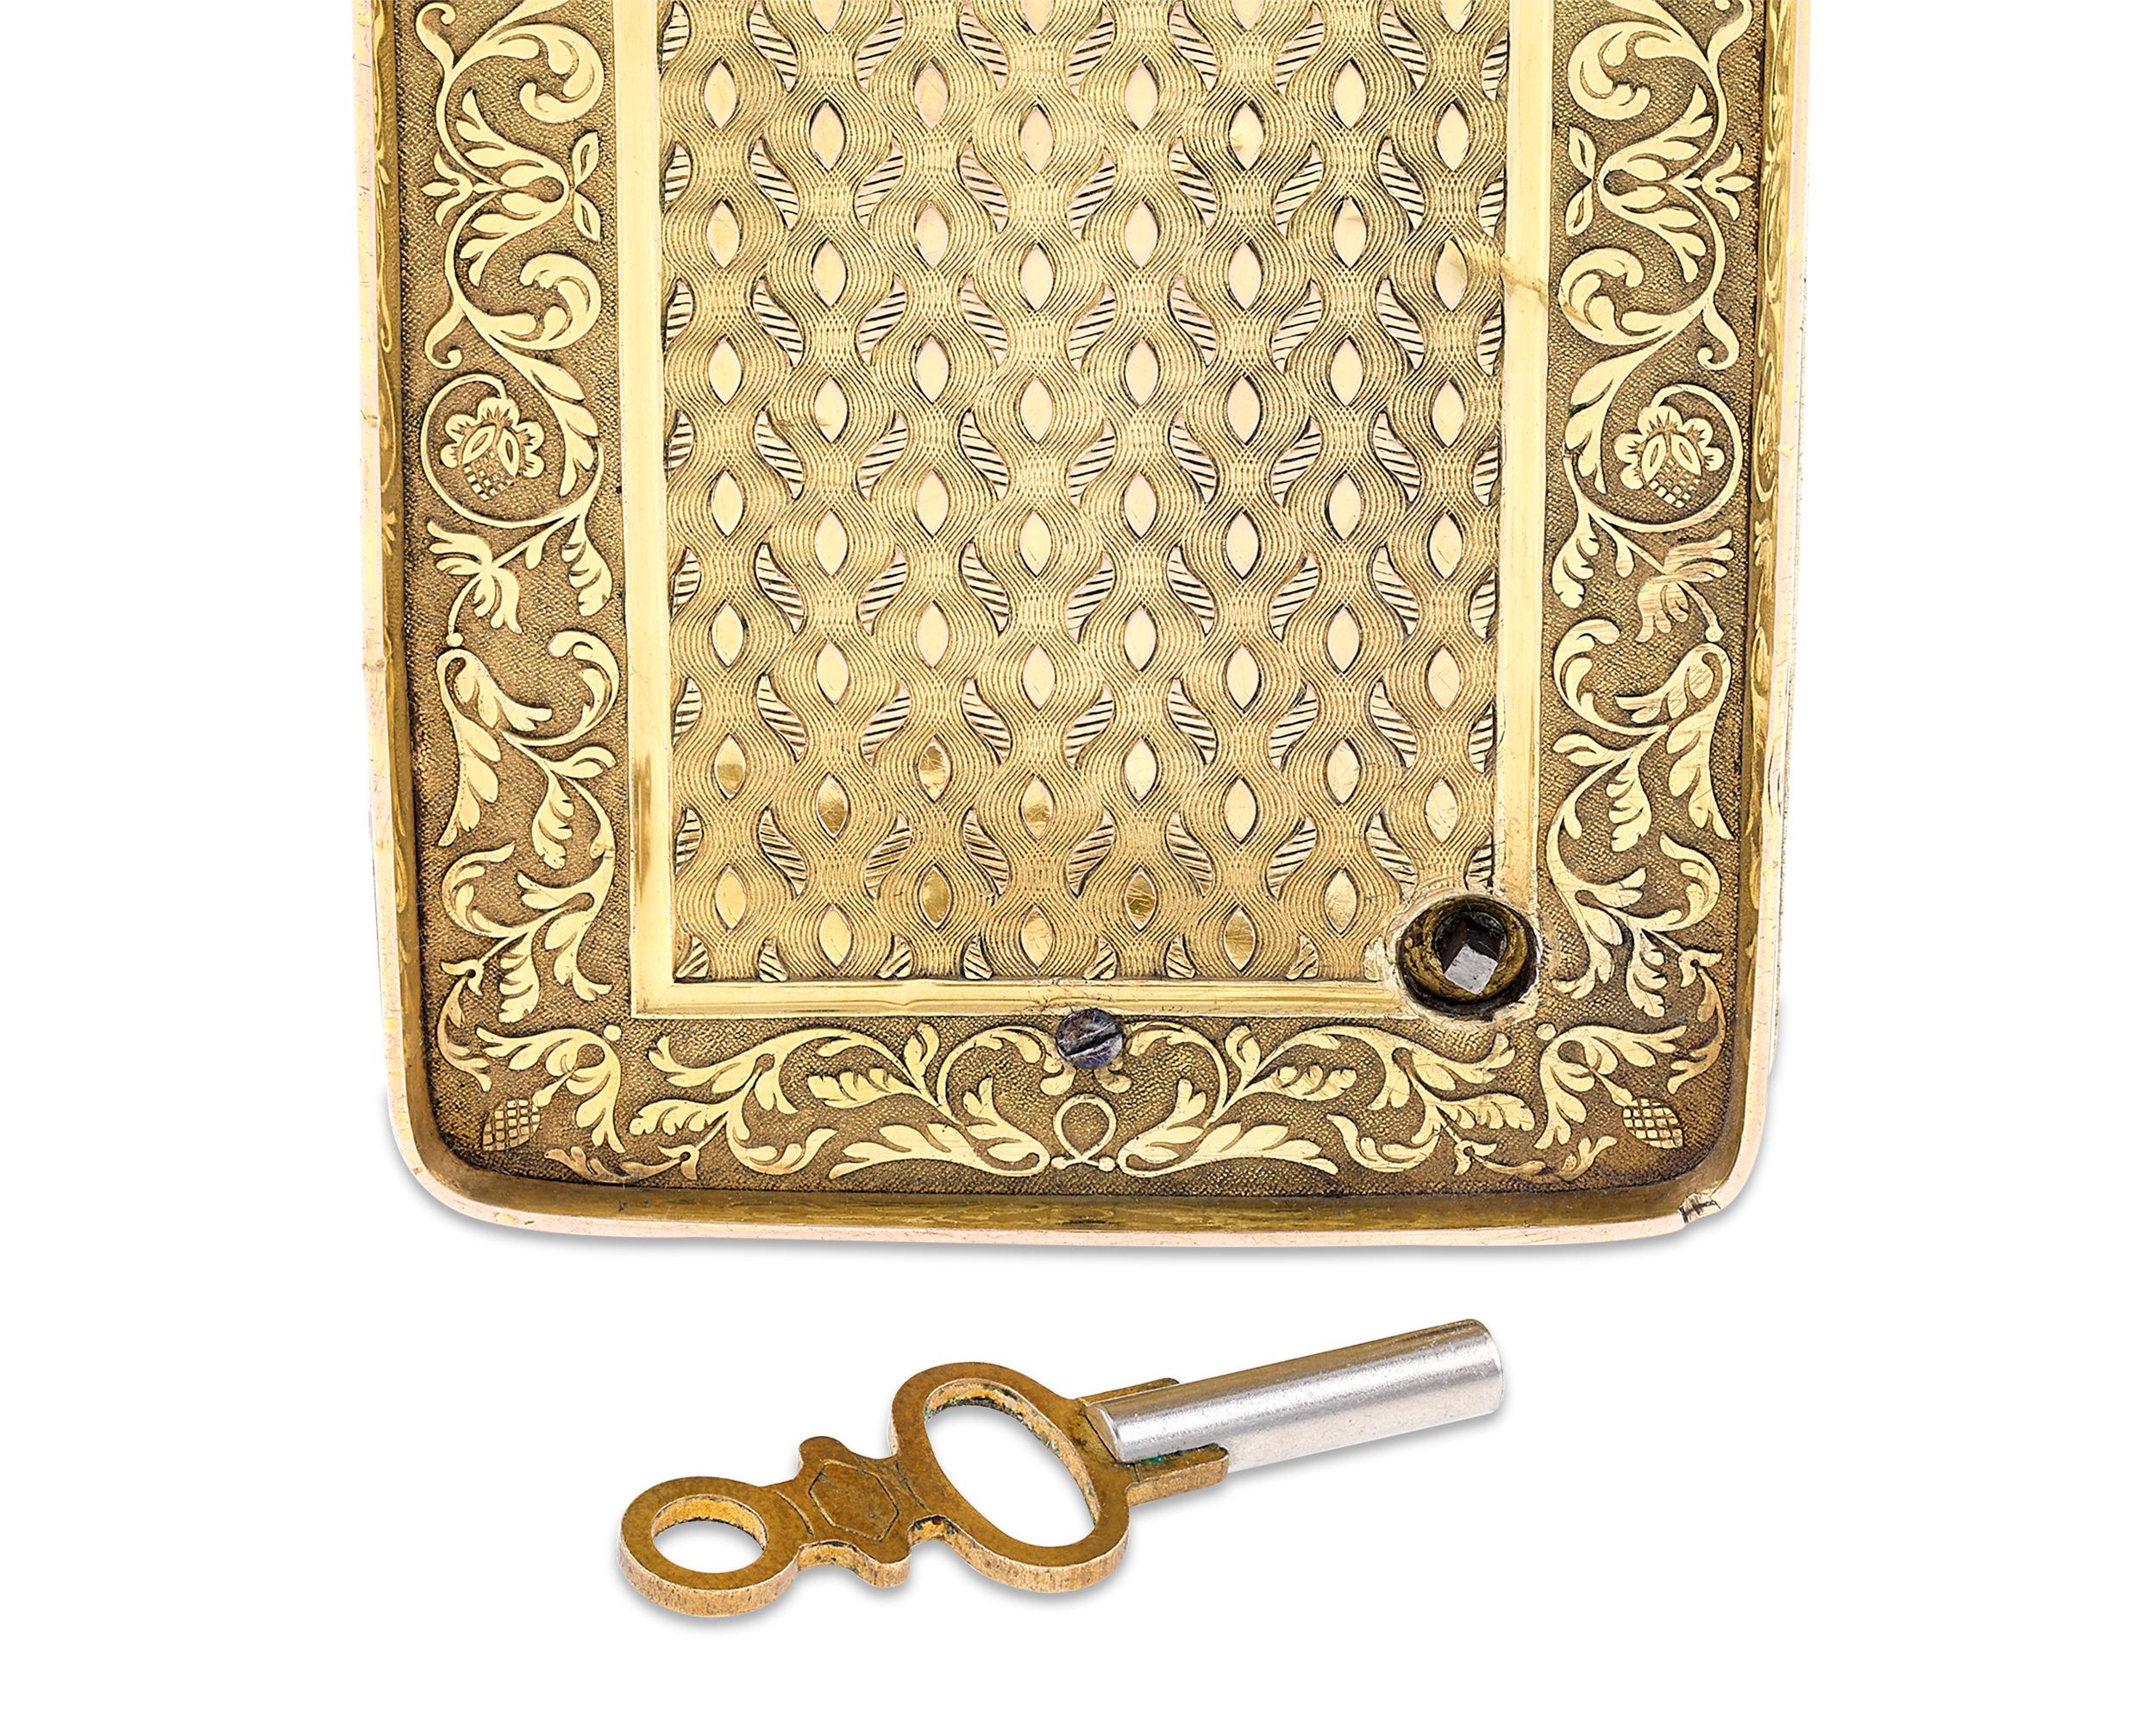 Swiss Silver-Gilt Musical Snuff Box by François Nicole For Sale